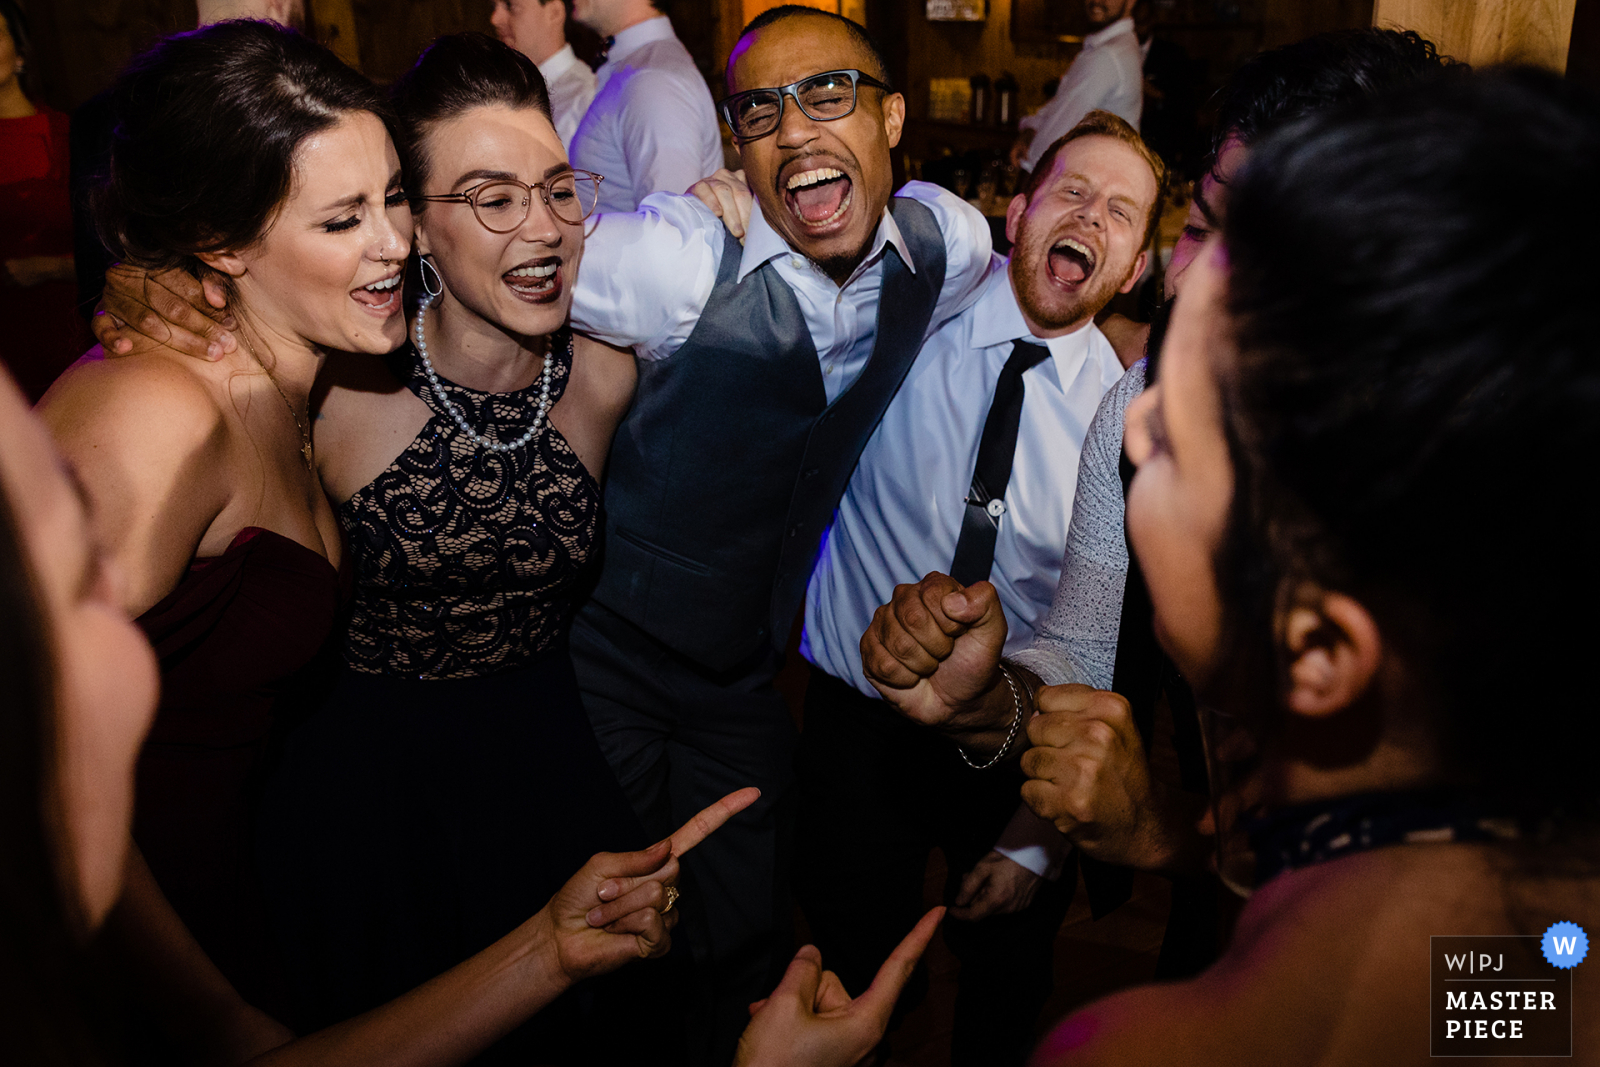 Award Winning Image from a Philadelphia wedding where the guests are partying at the reception